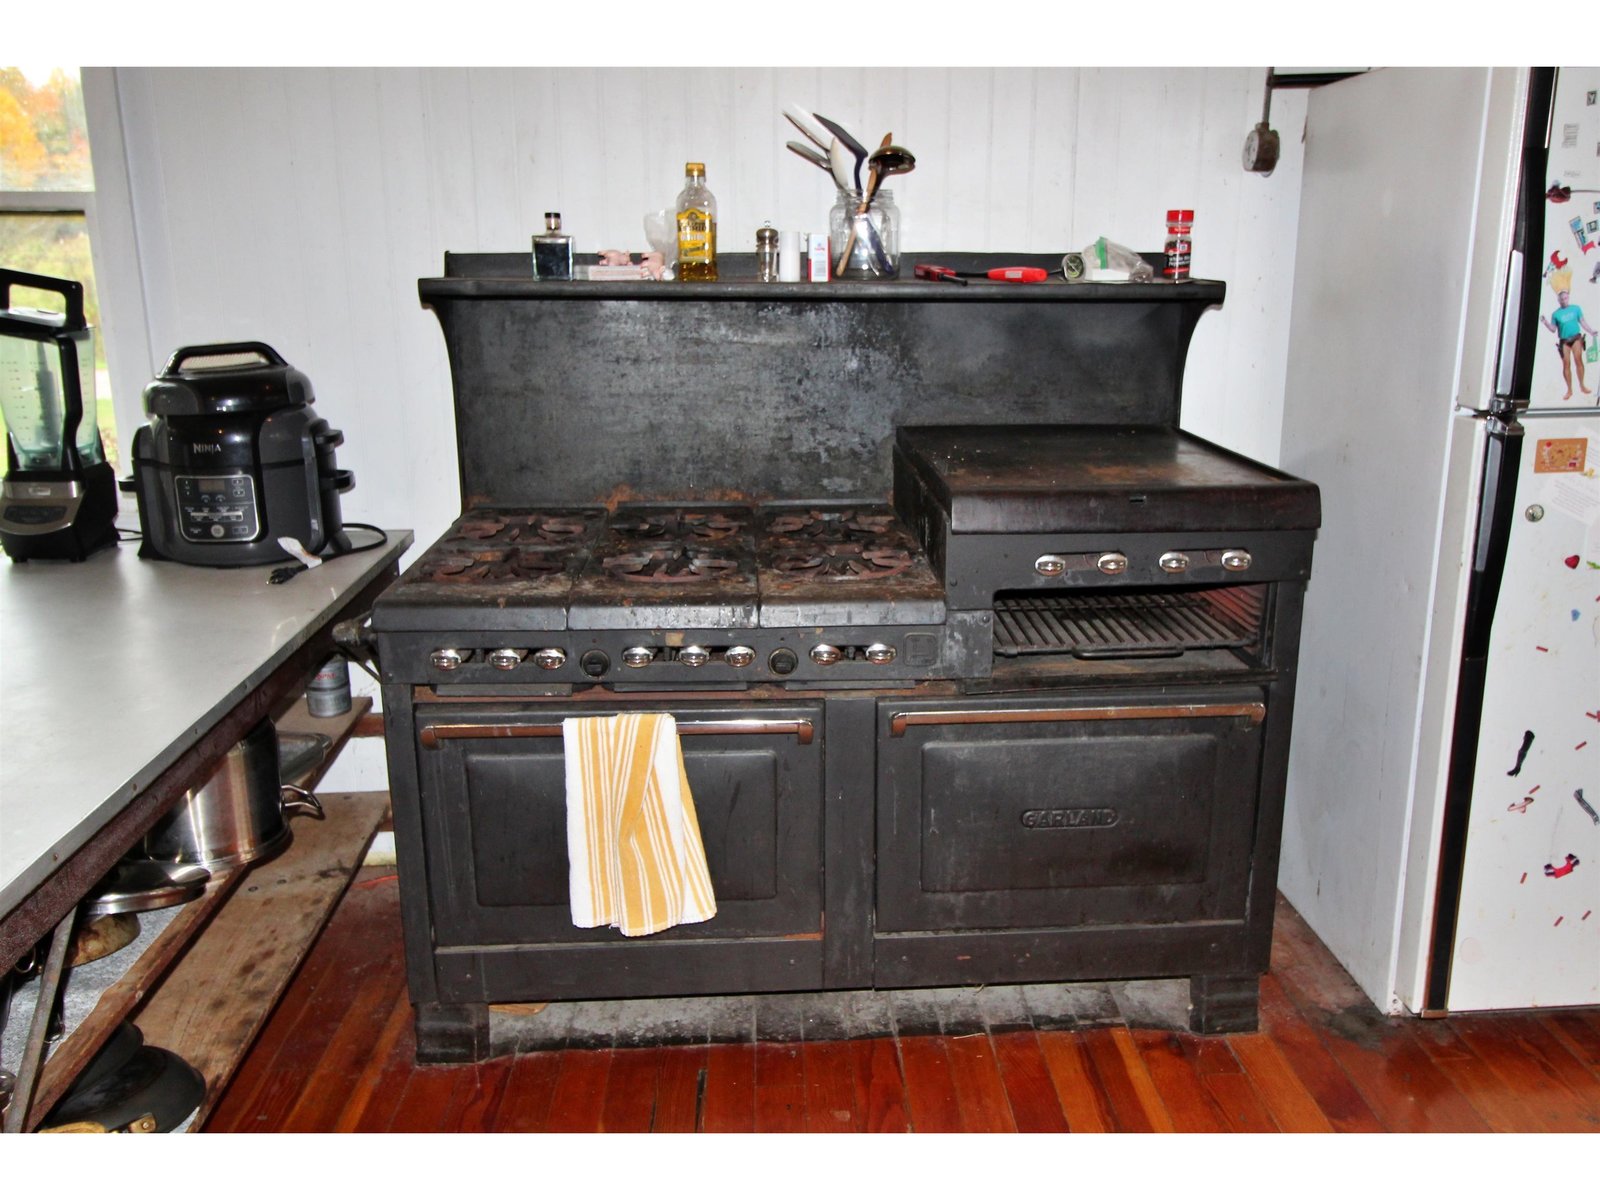 Cook's stove